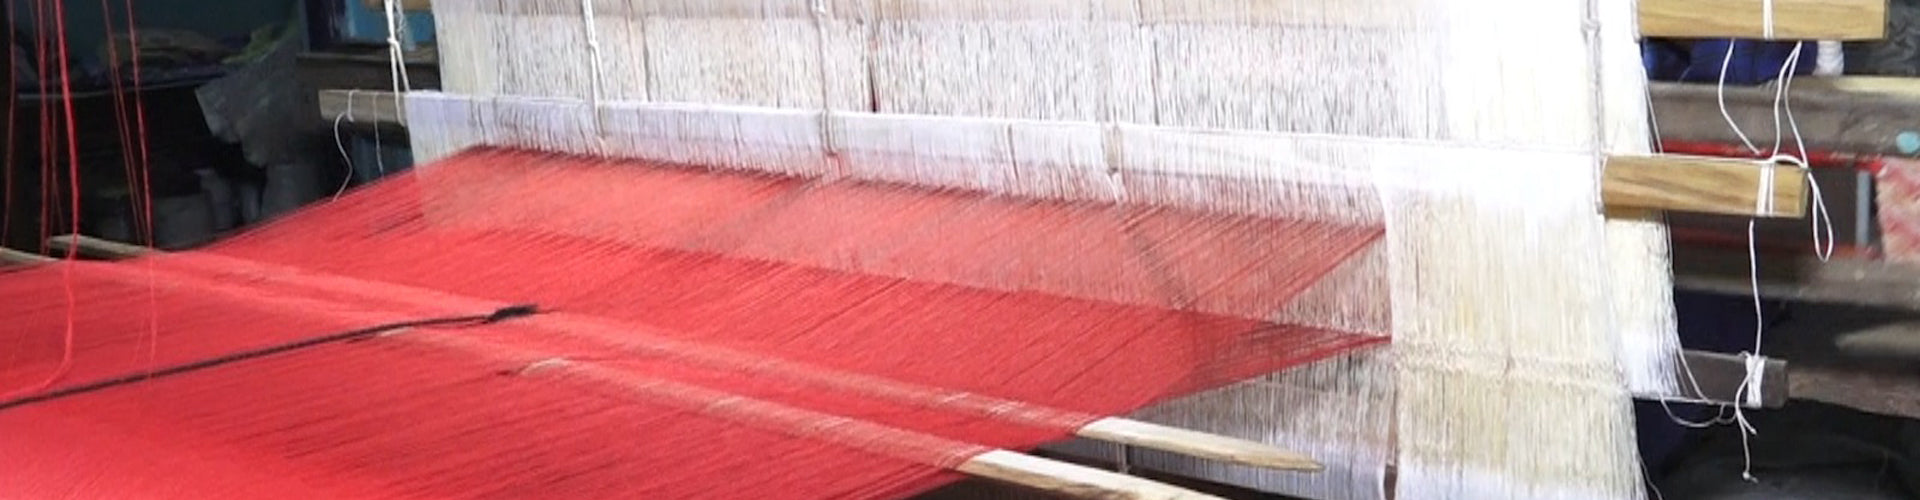 Odisha sarees are celebrated for their weaving techniques